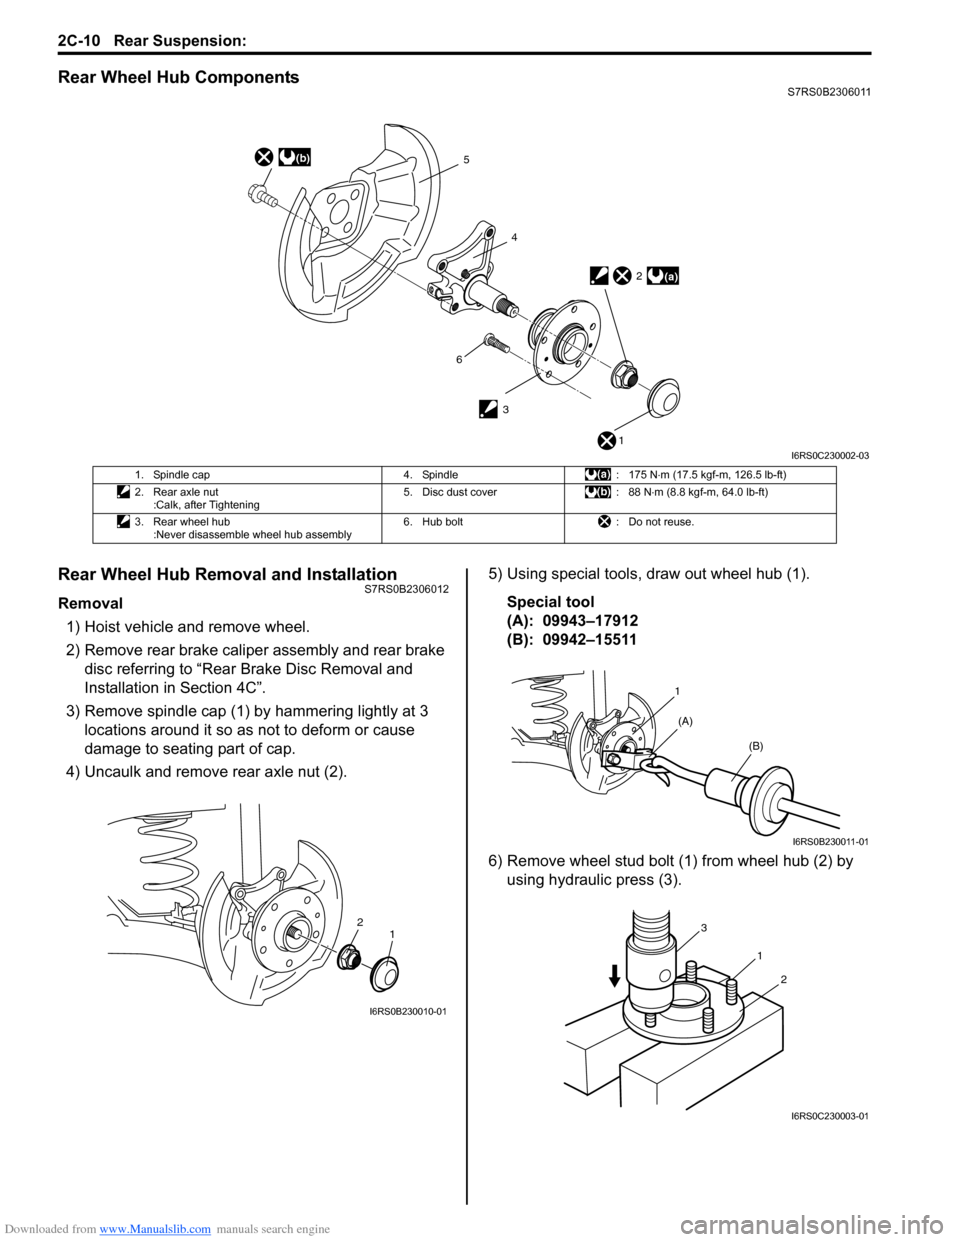 SUZUKI SWIFT 2006 2.G Service Workshop Manual Downloaded from www.Manualslib.com manuals search engine 2C-10 Rear Suspension: 
Rear Wheel Hub ComponentsS7RS0B2306011
Rear Wheel Hub Removal and InstallationS7RS0B2306012
Removal1) Hoist vehicle and